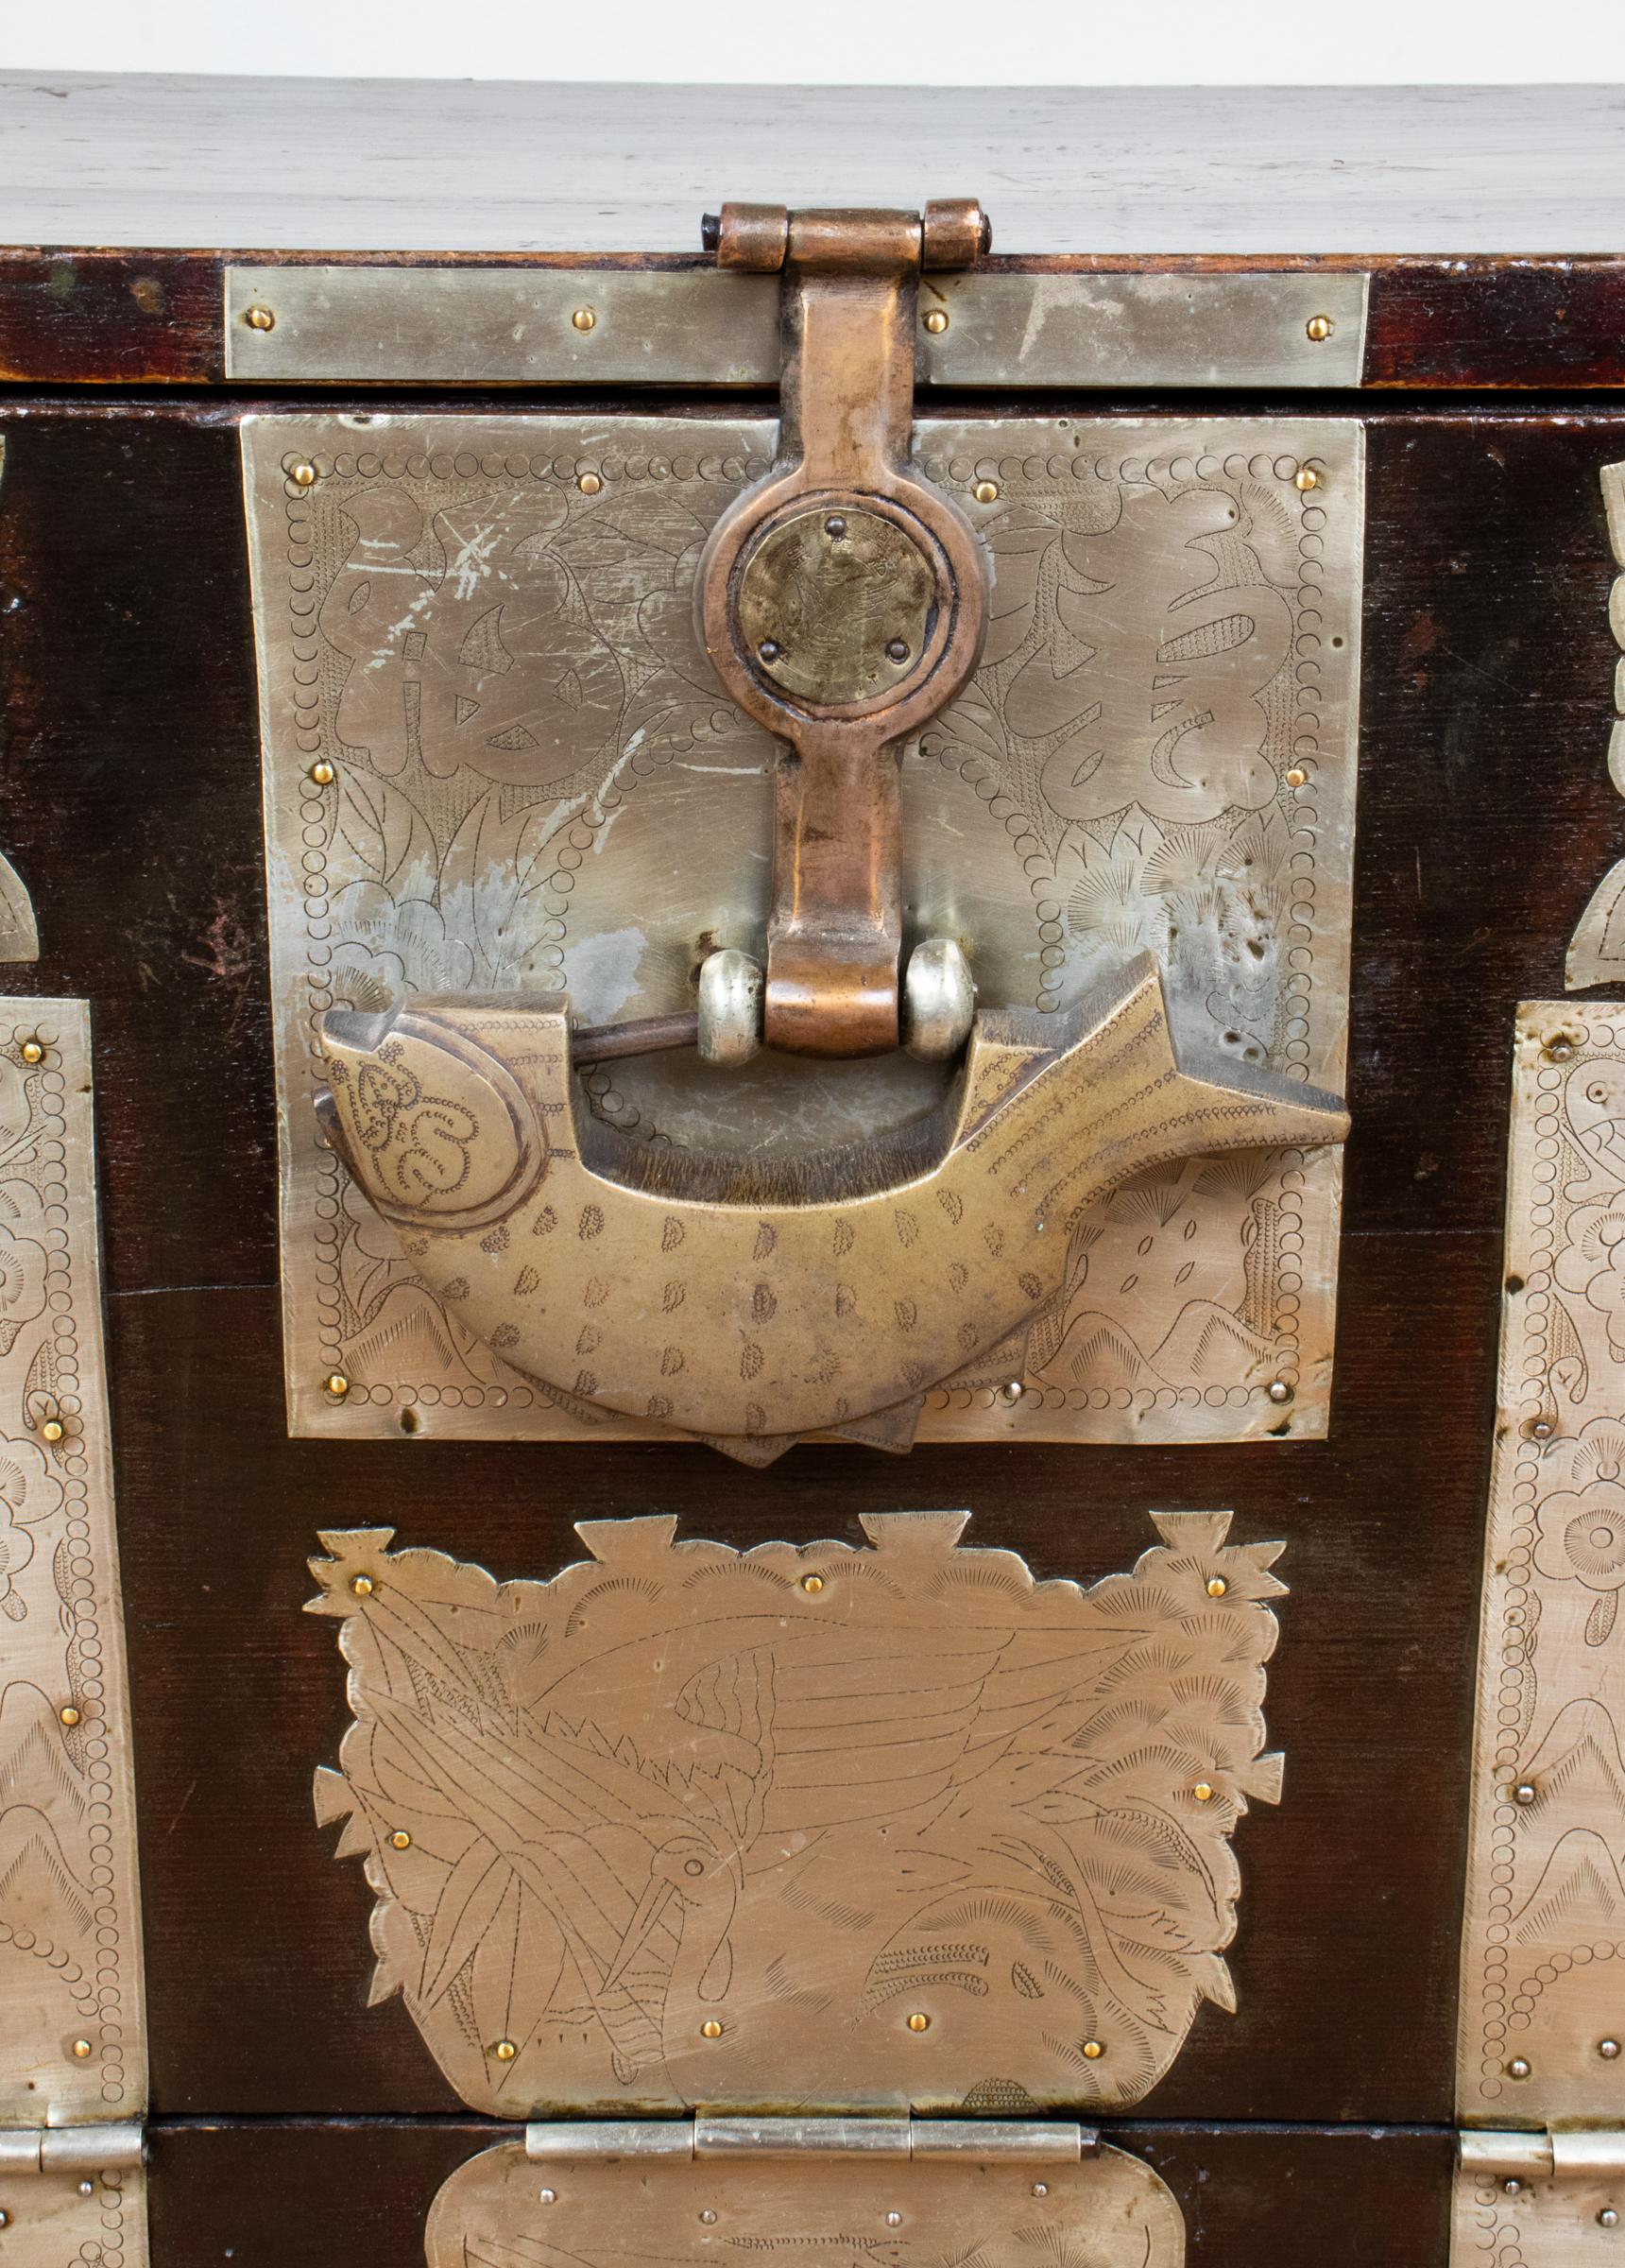 Korean Bandaji hardwood storage tansu chest, 19th century, with drop-front panel with a large central ring lock in the form of a stylized bird lock, overall with chased hardware having incised animal and character designs, with spacious storage